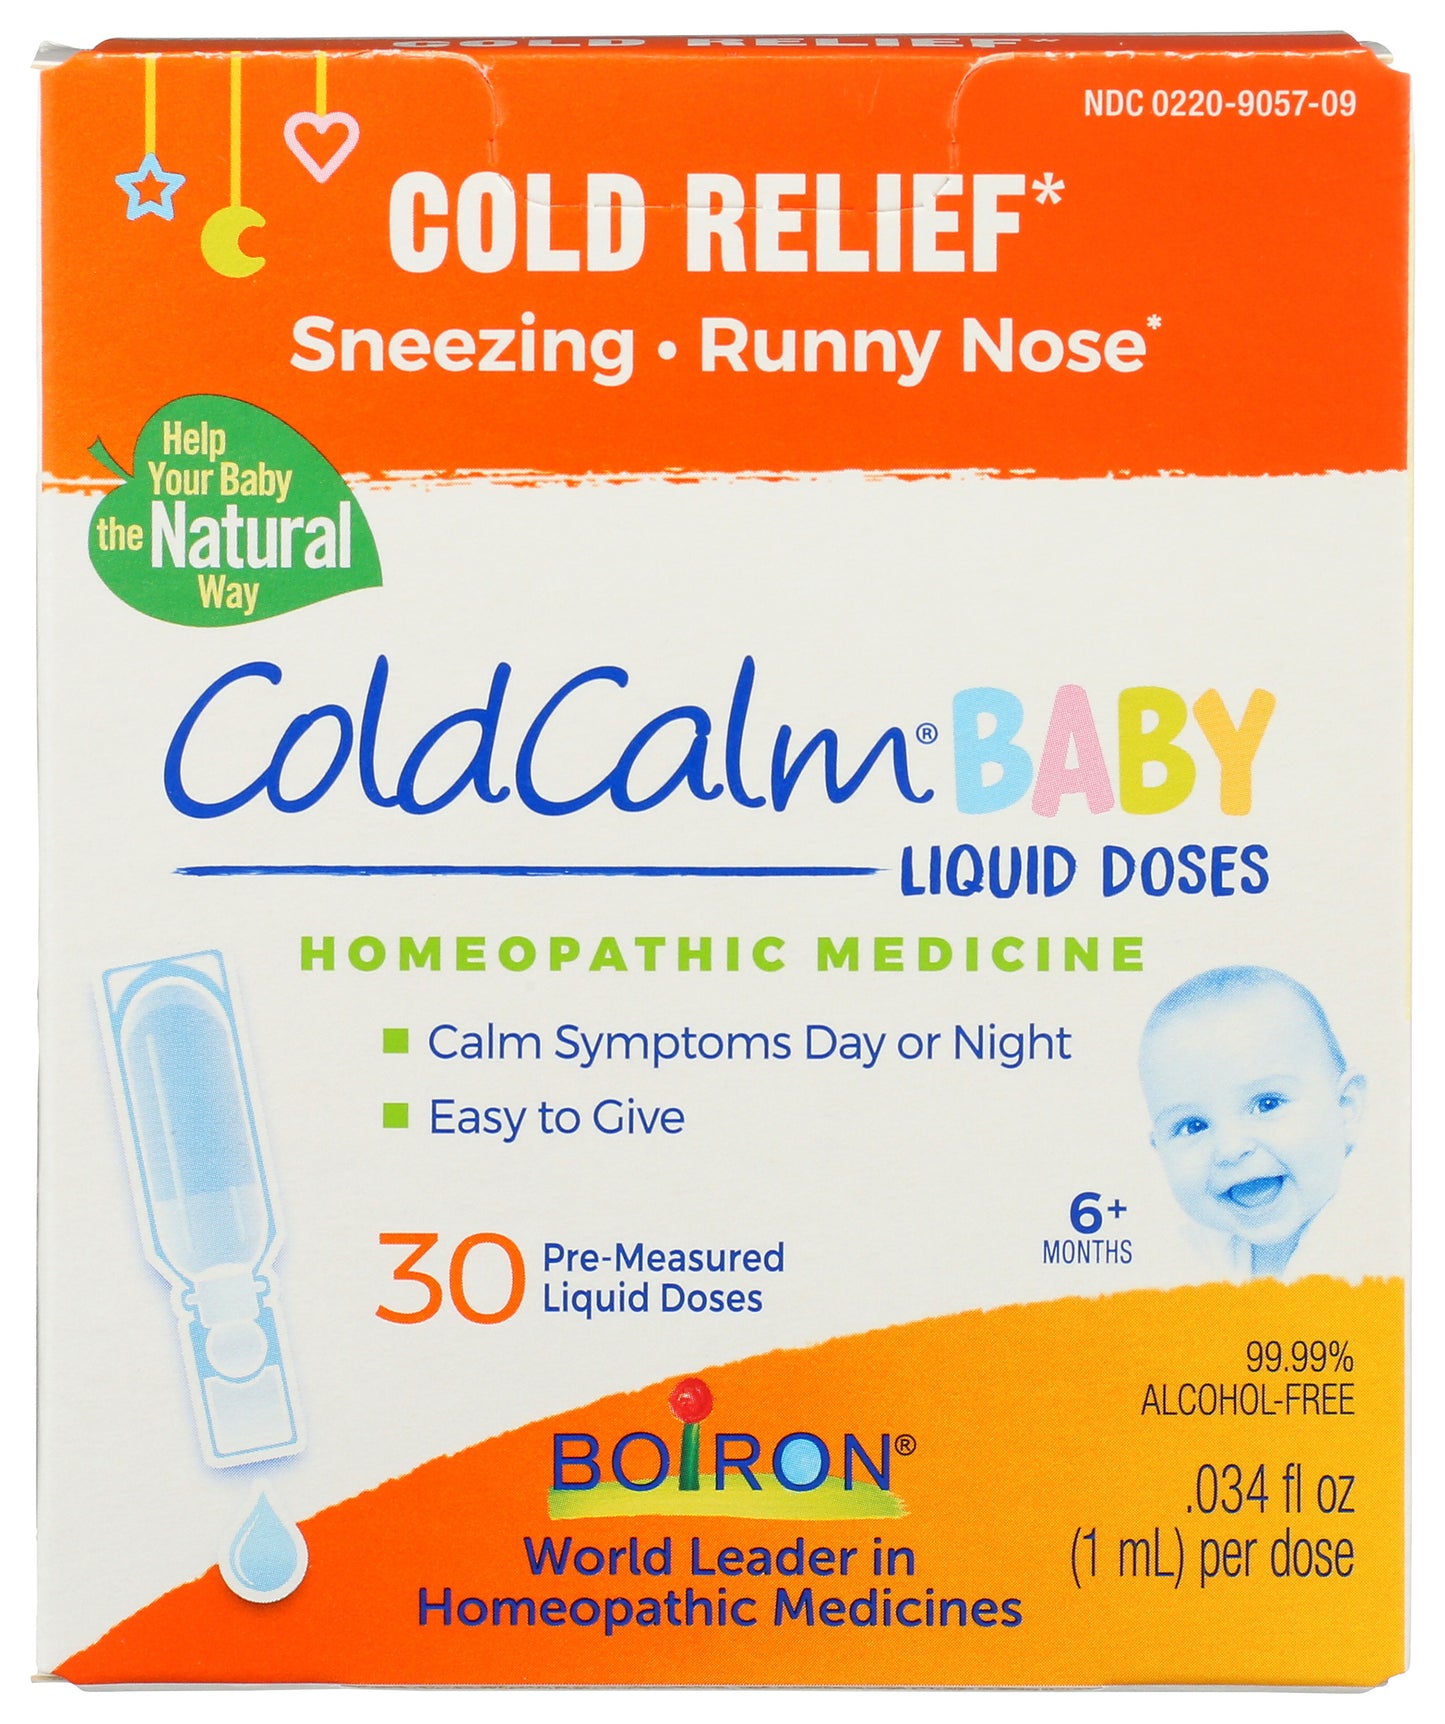 Boiron ColdCalm Baby 30 Liquid Doses Front